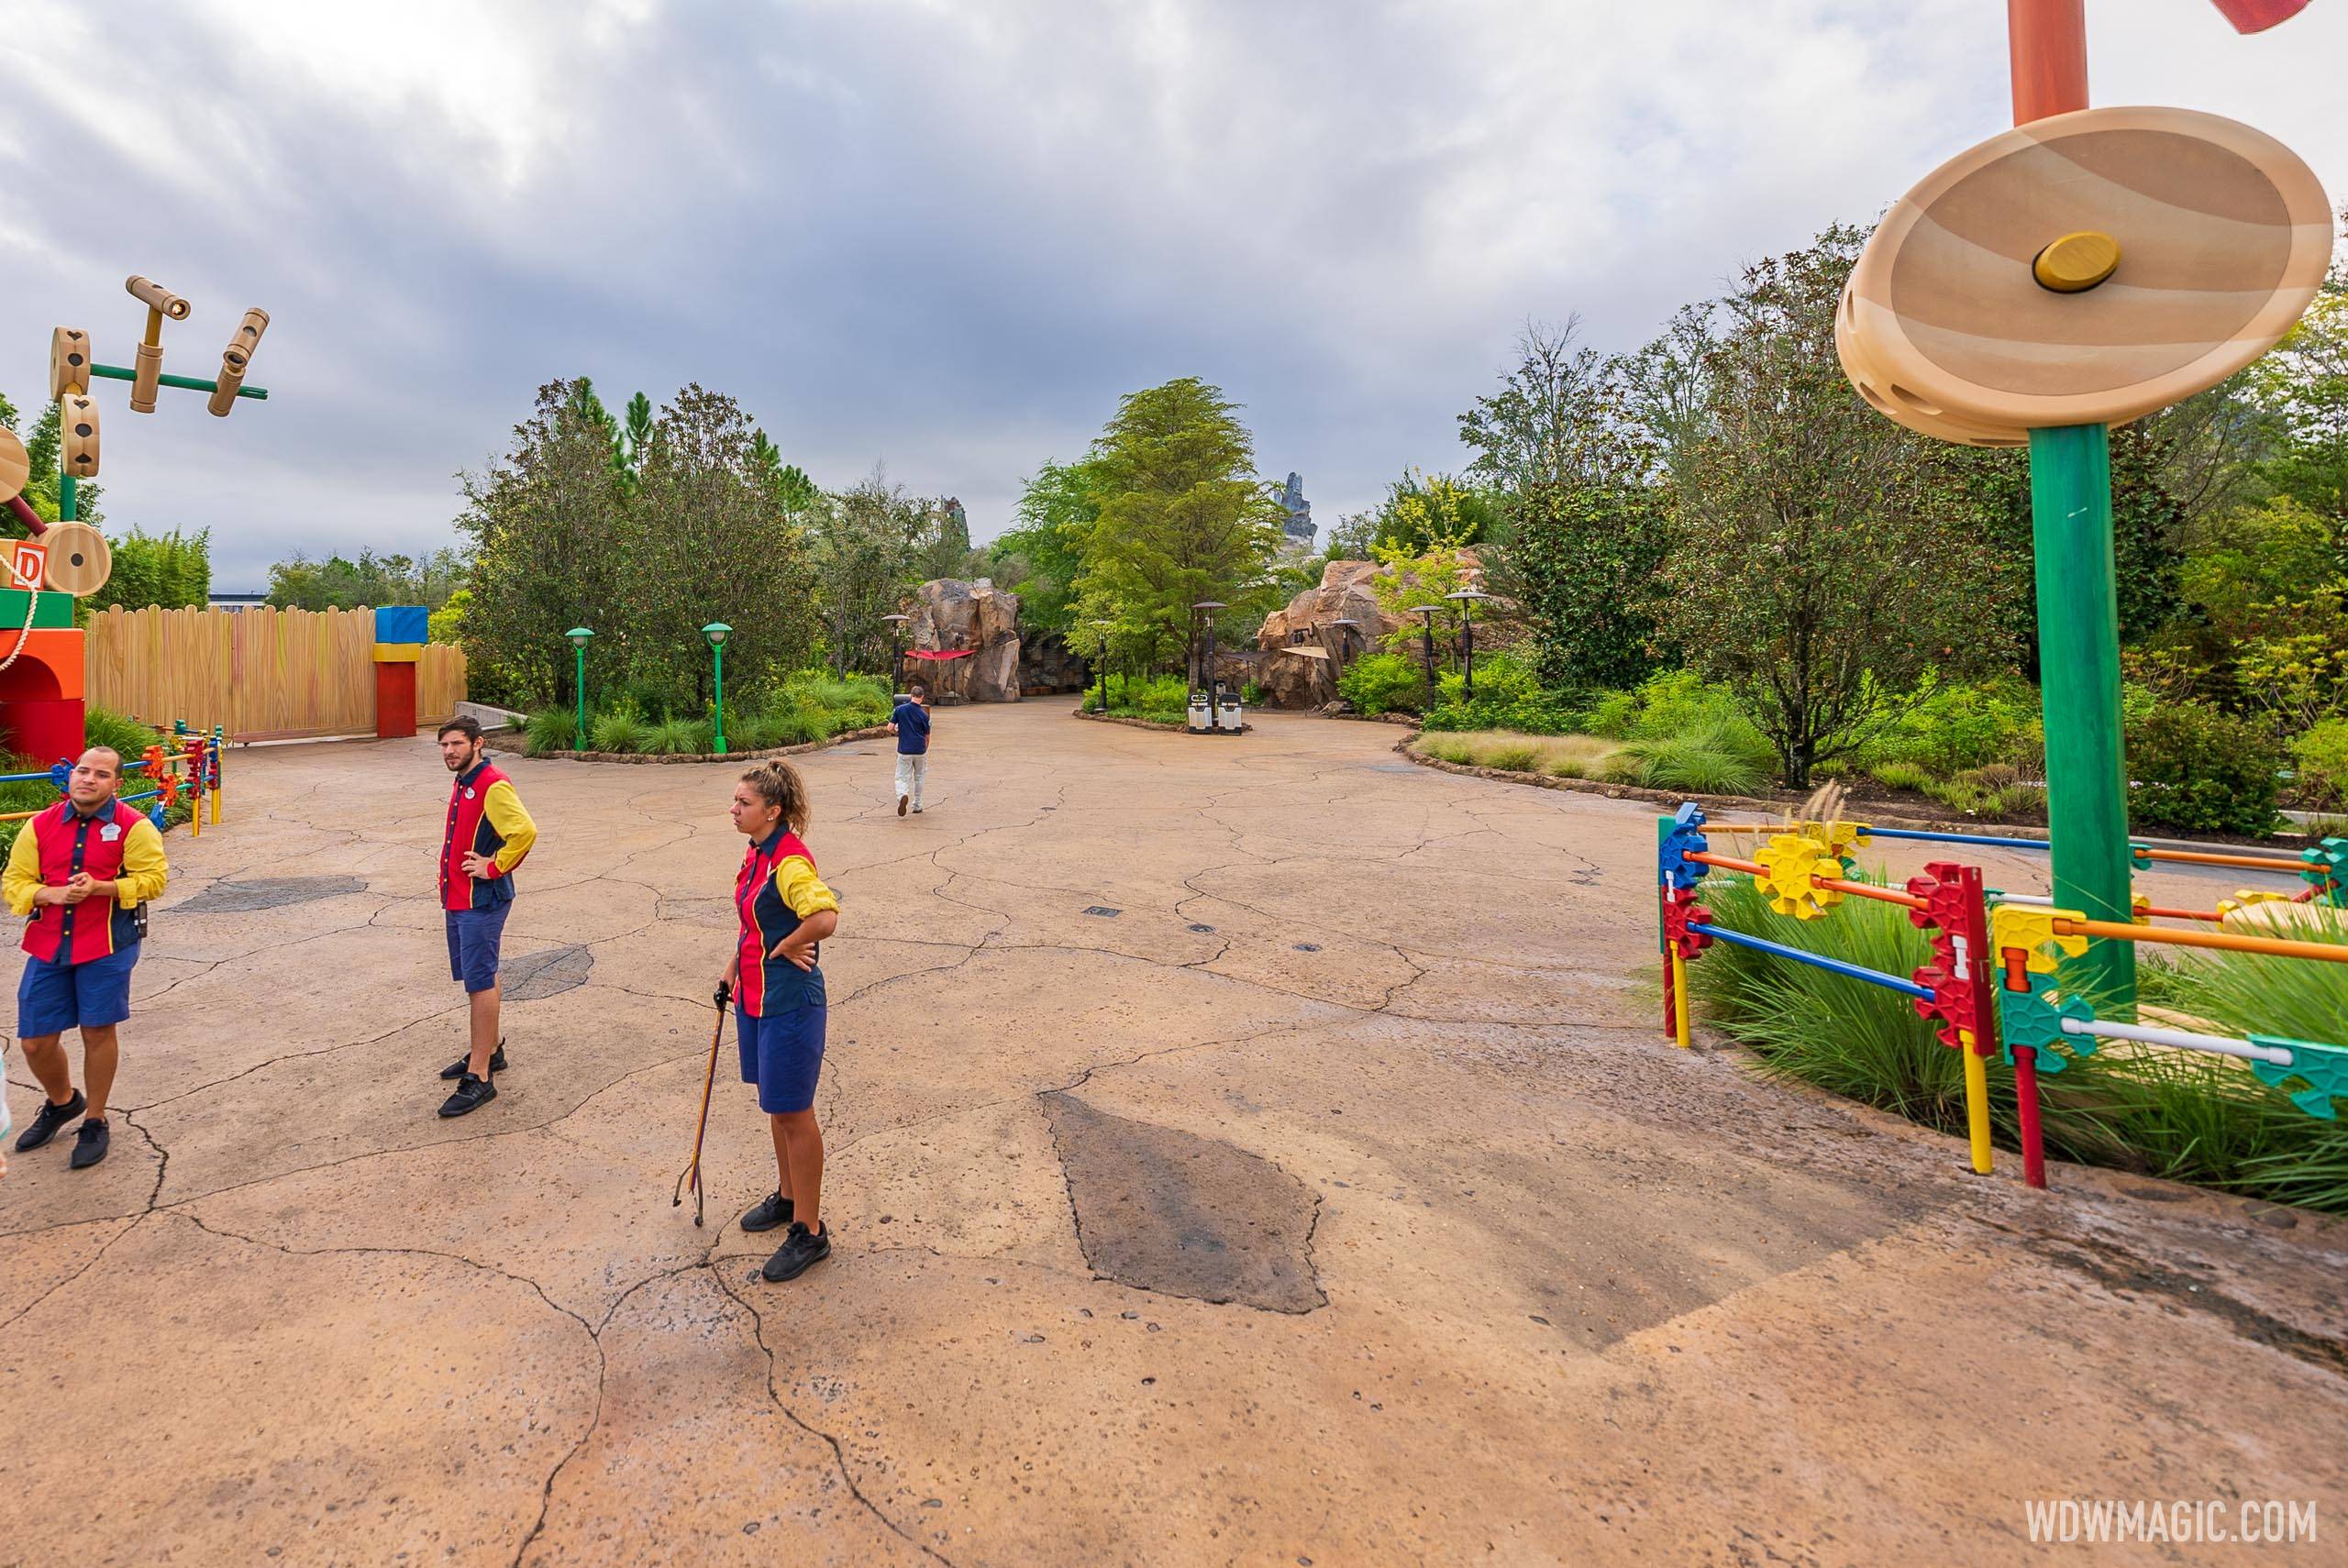 Access to Galaxy's Edge via Toy Story Land is blocked